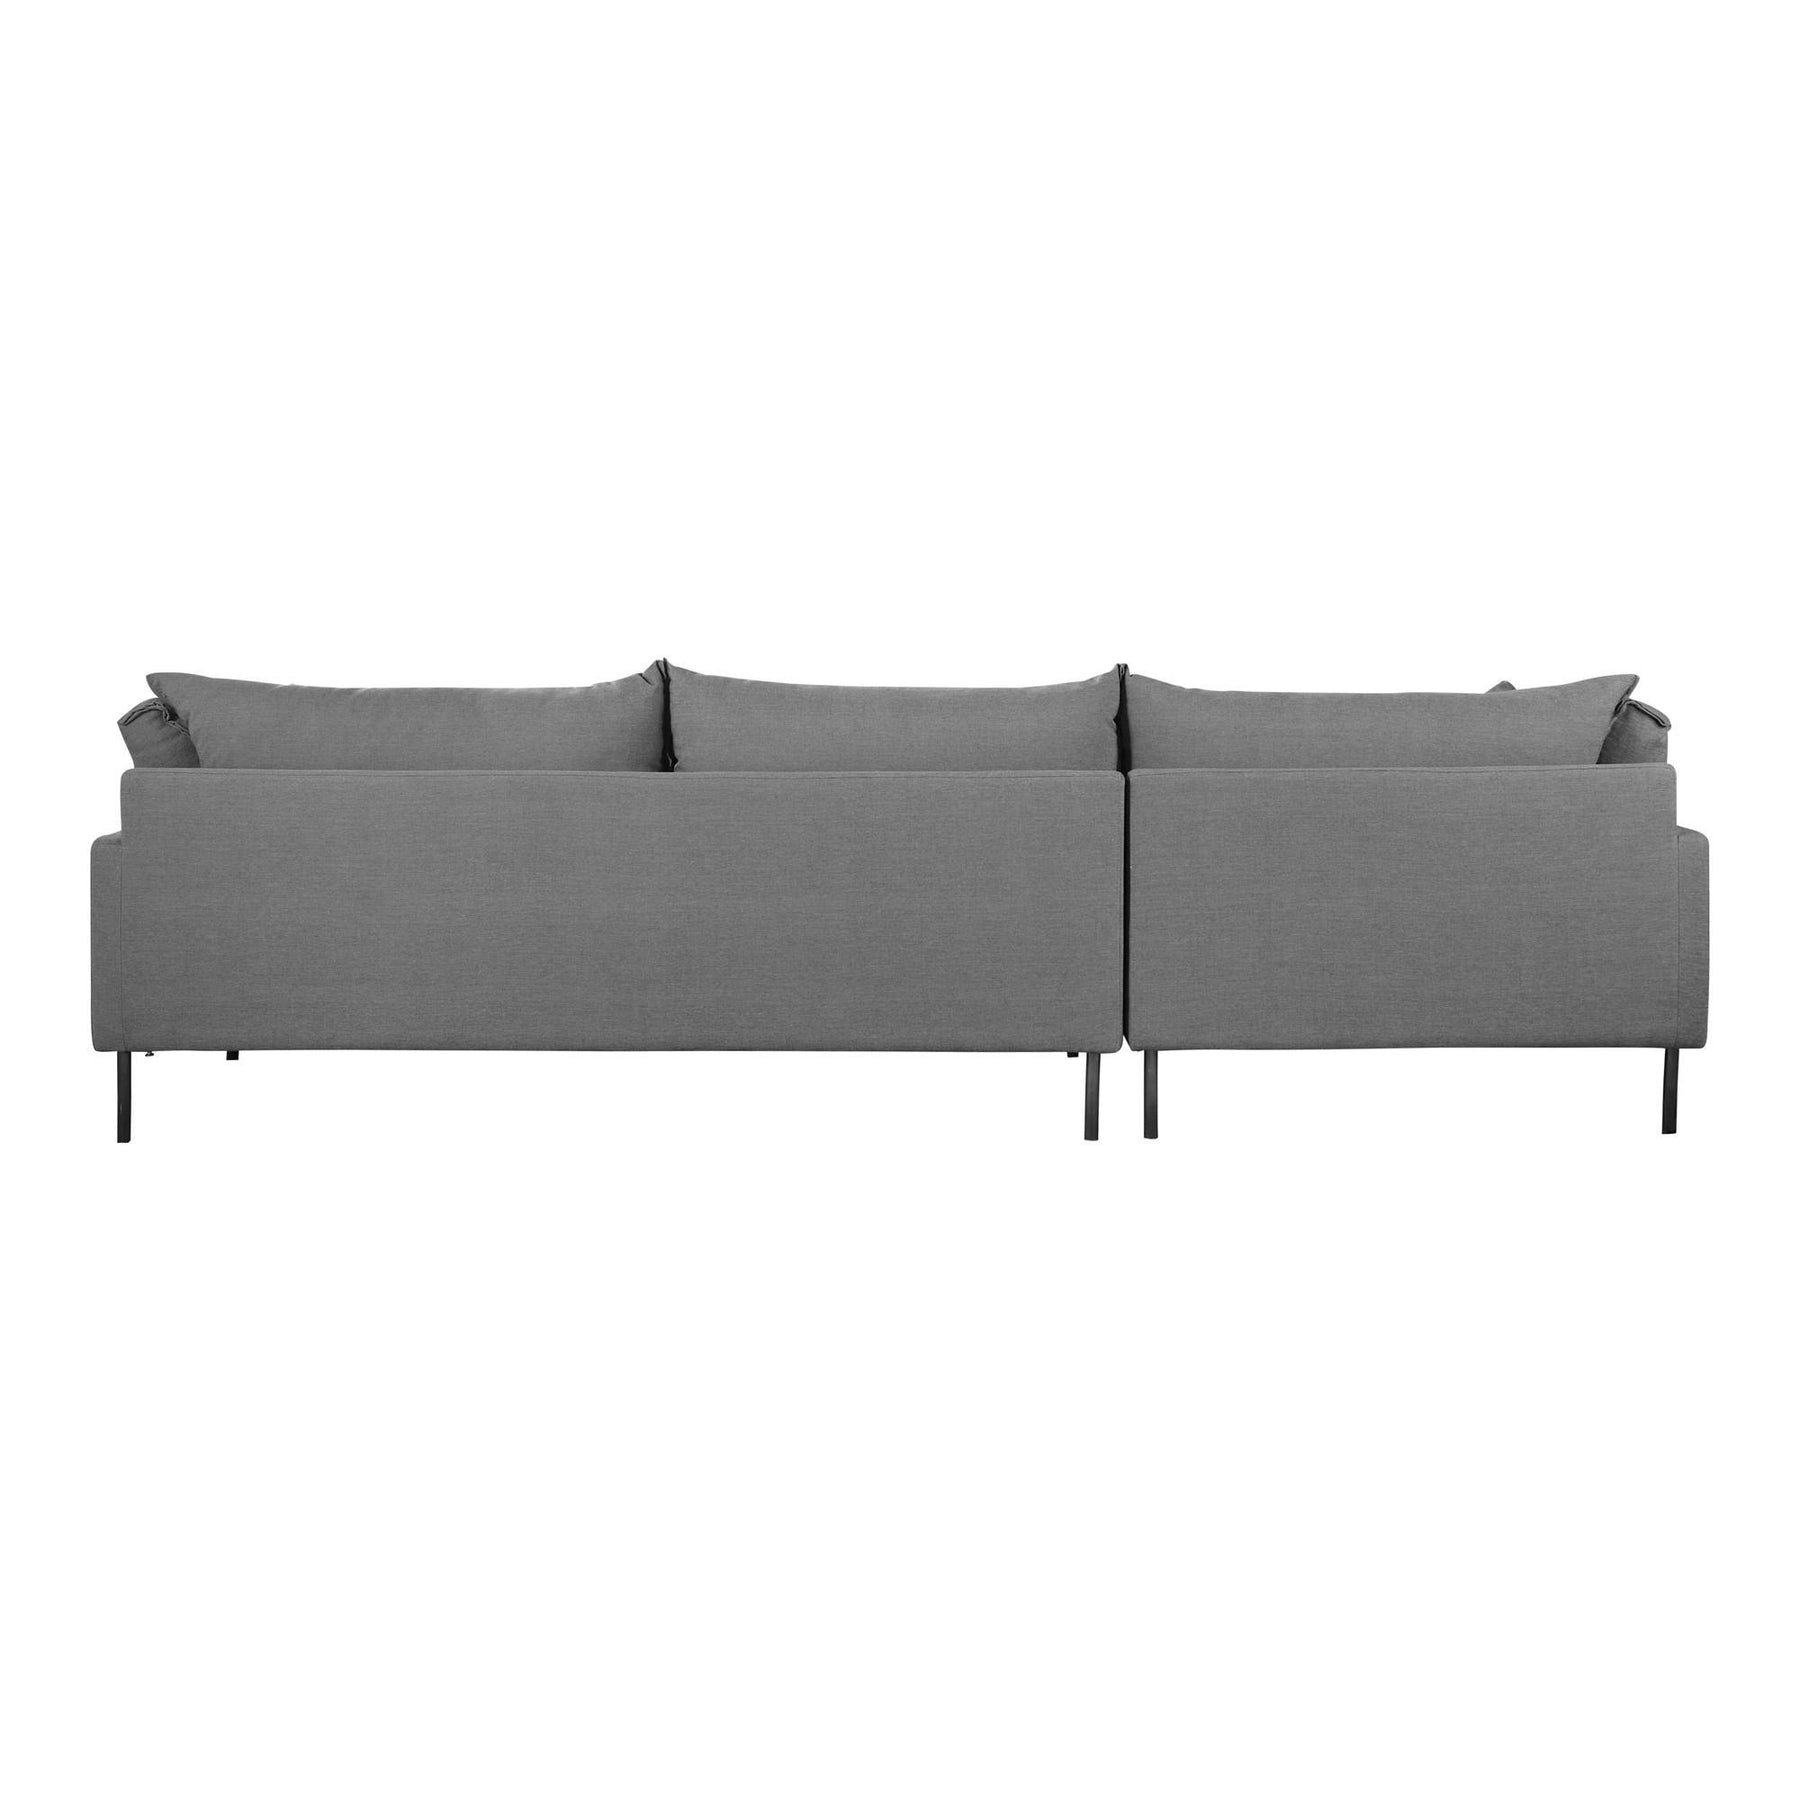 Moe's Home Collection Jamara Sectional Charcoal Right - UB-1016-07-R